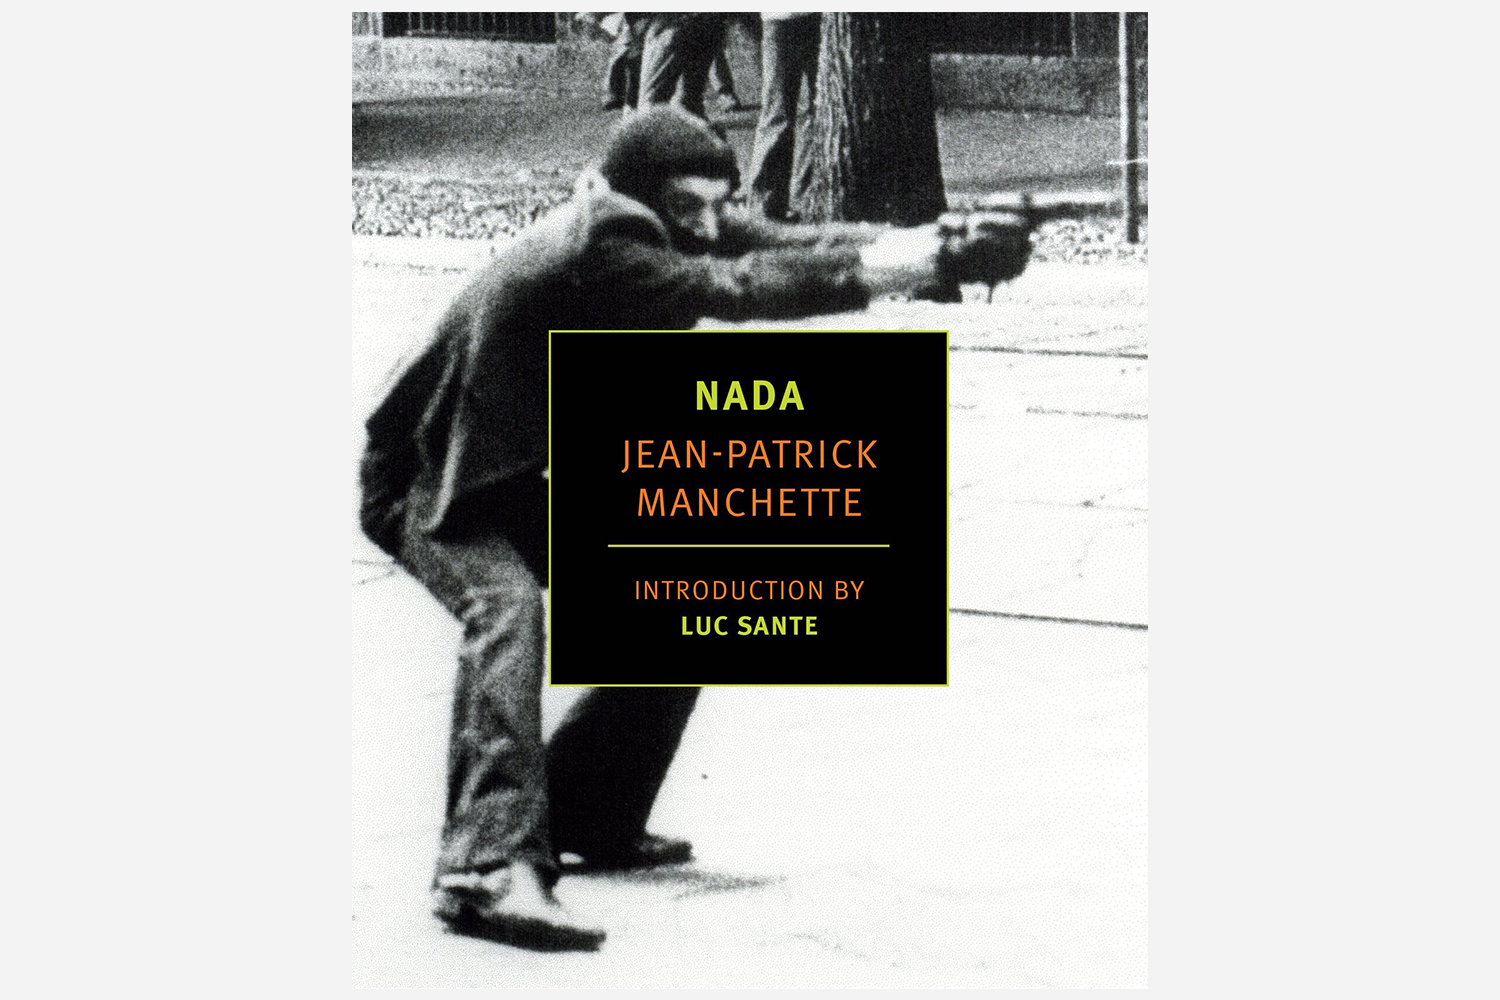 Nada by Jean-Patrick Manchette From NYRB Classics